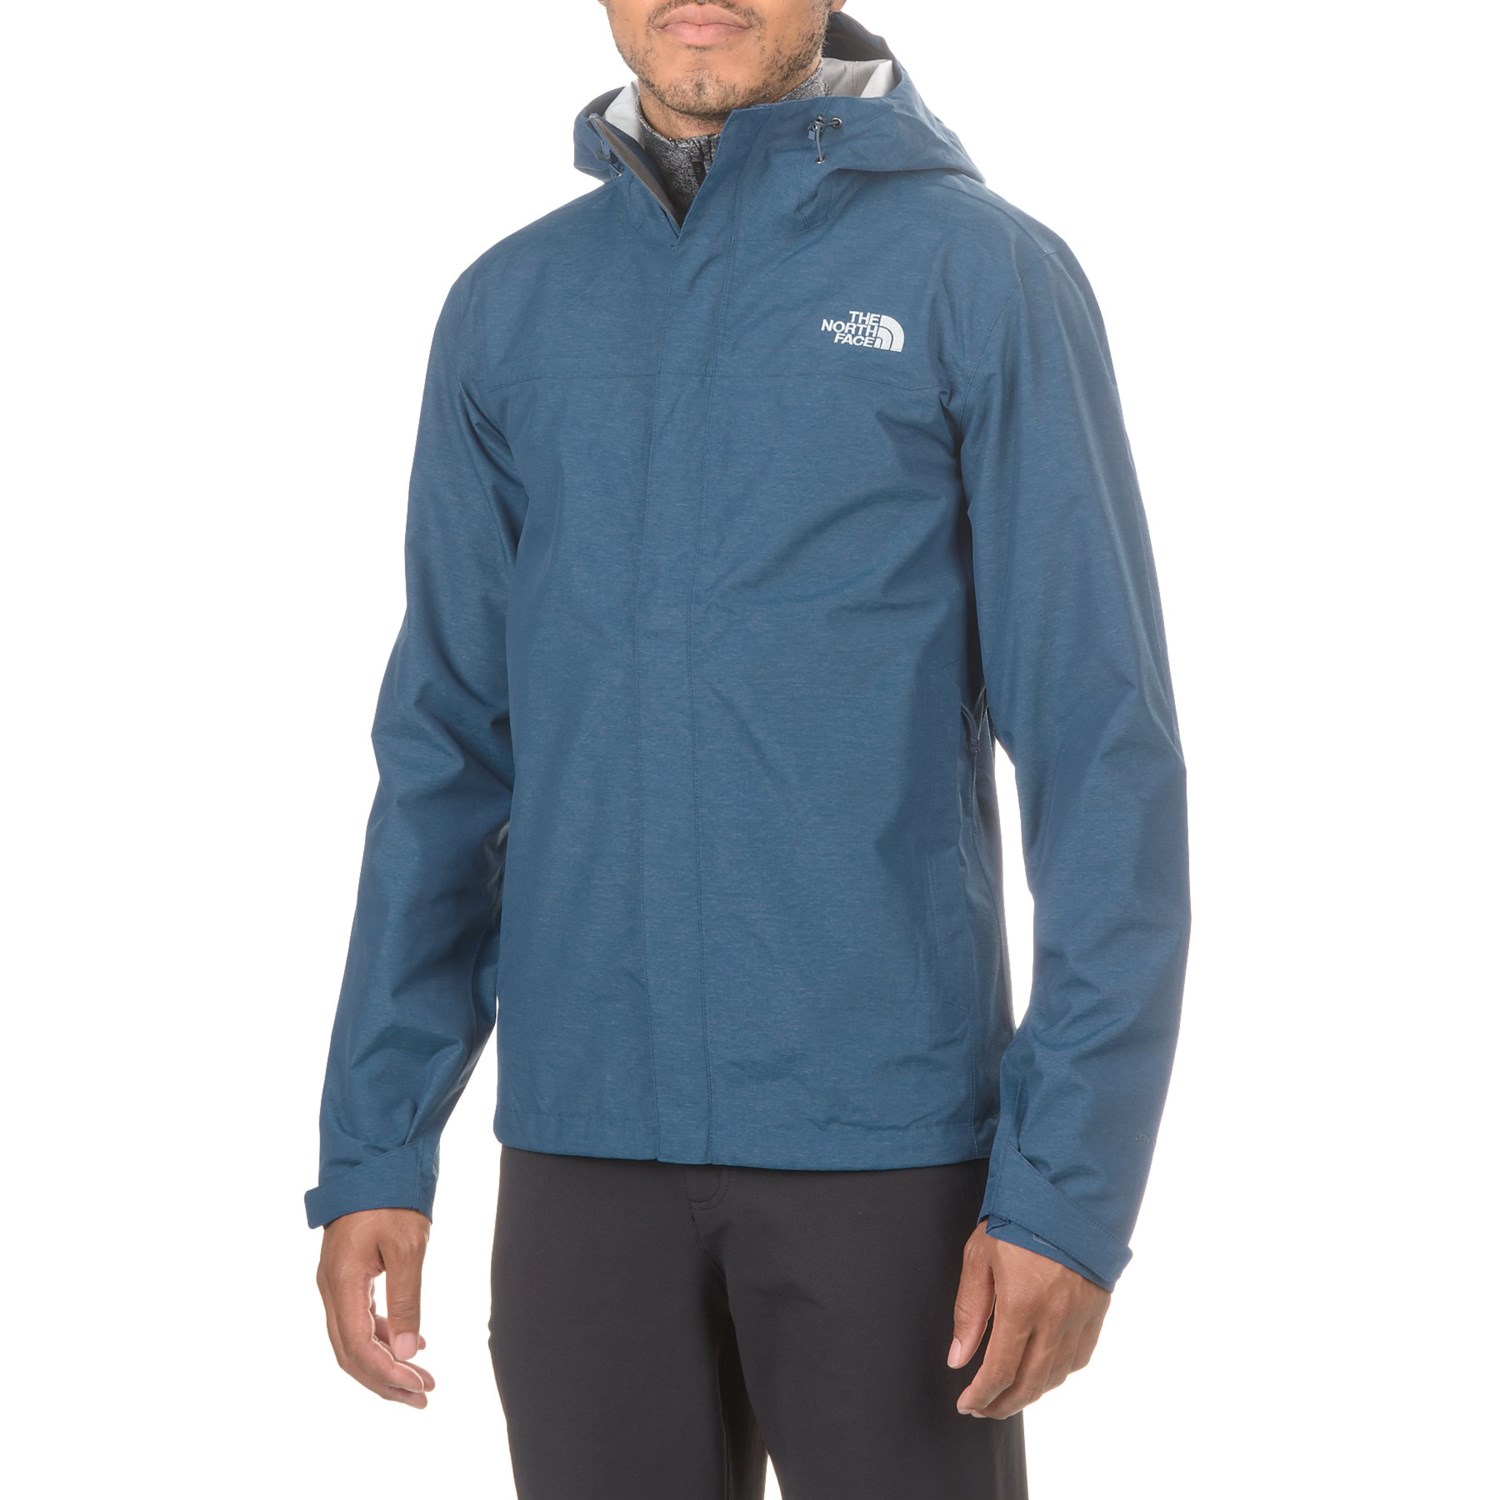 The North Face Venture Hooded Jacket – Waterproof (For Men)